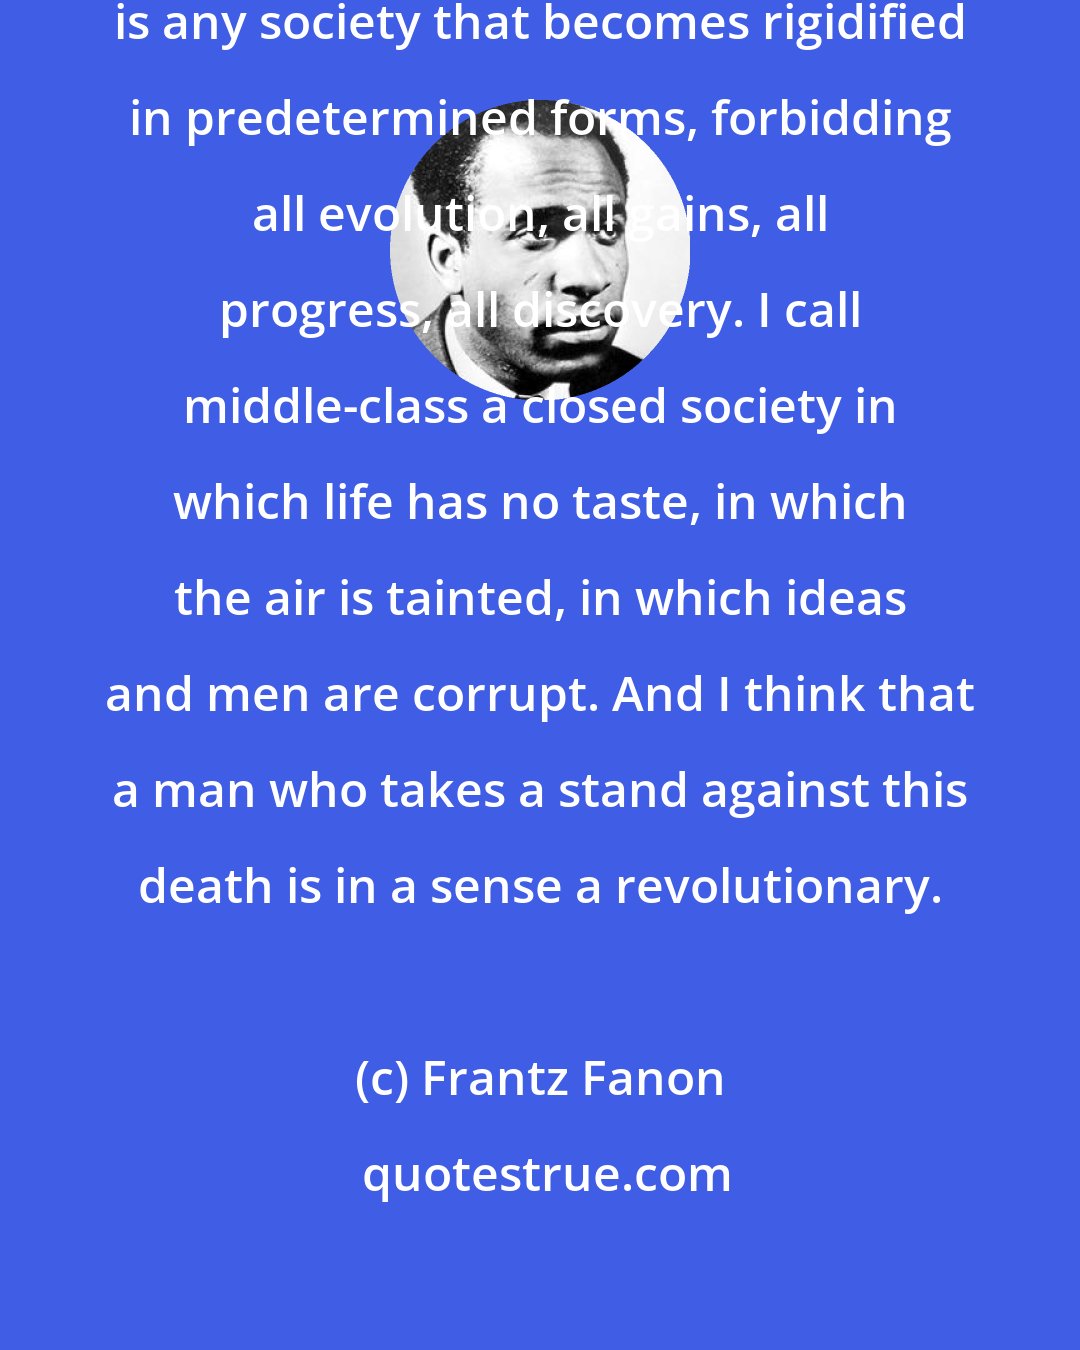 Frantz Fanon: What I call middle-class society is any society that becomes rigidified in predetermined forms, forbidding all evolution, all gains, all progress, all discovery. I call middle-class a closed society in which life has no taste, in which the air is tainted, in which ideas and men are corrupt. And I think that a man who takes a stand against this death is in a sense a revolutionary.